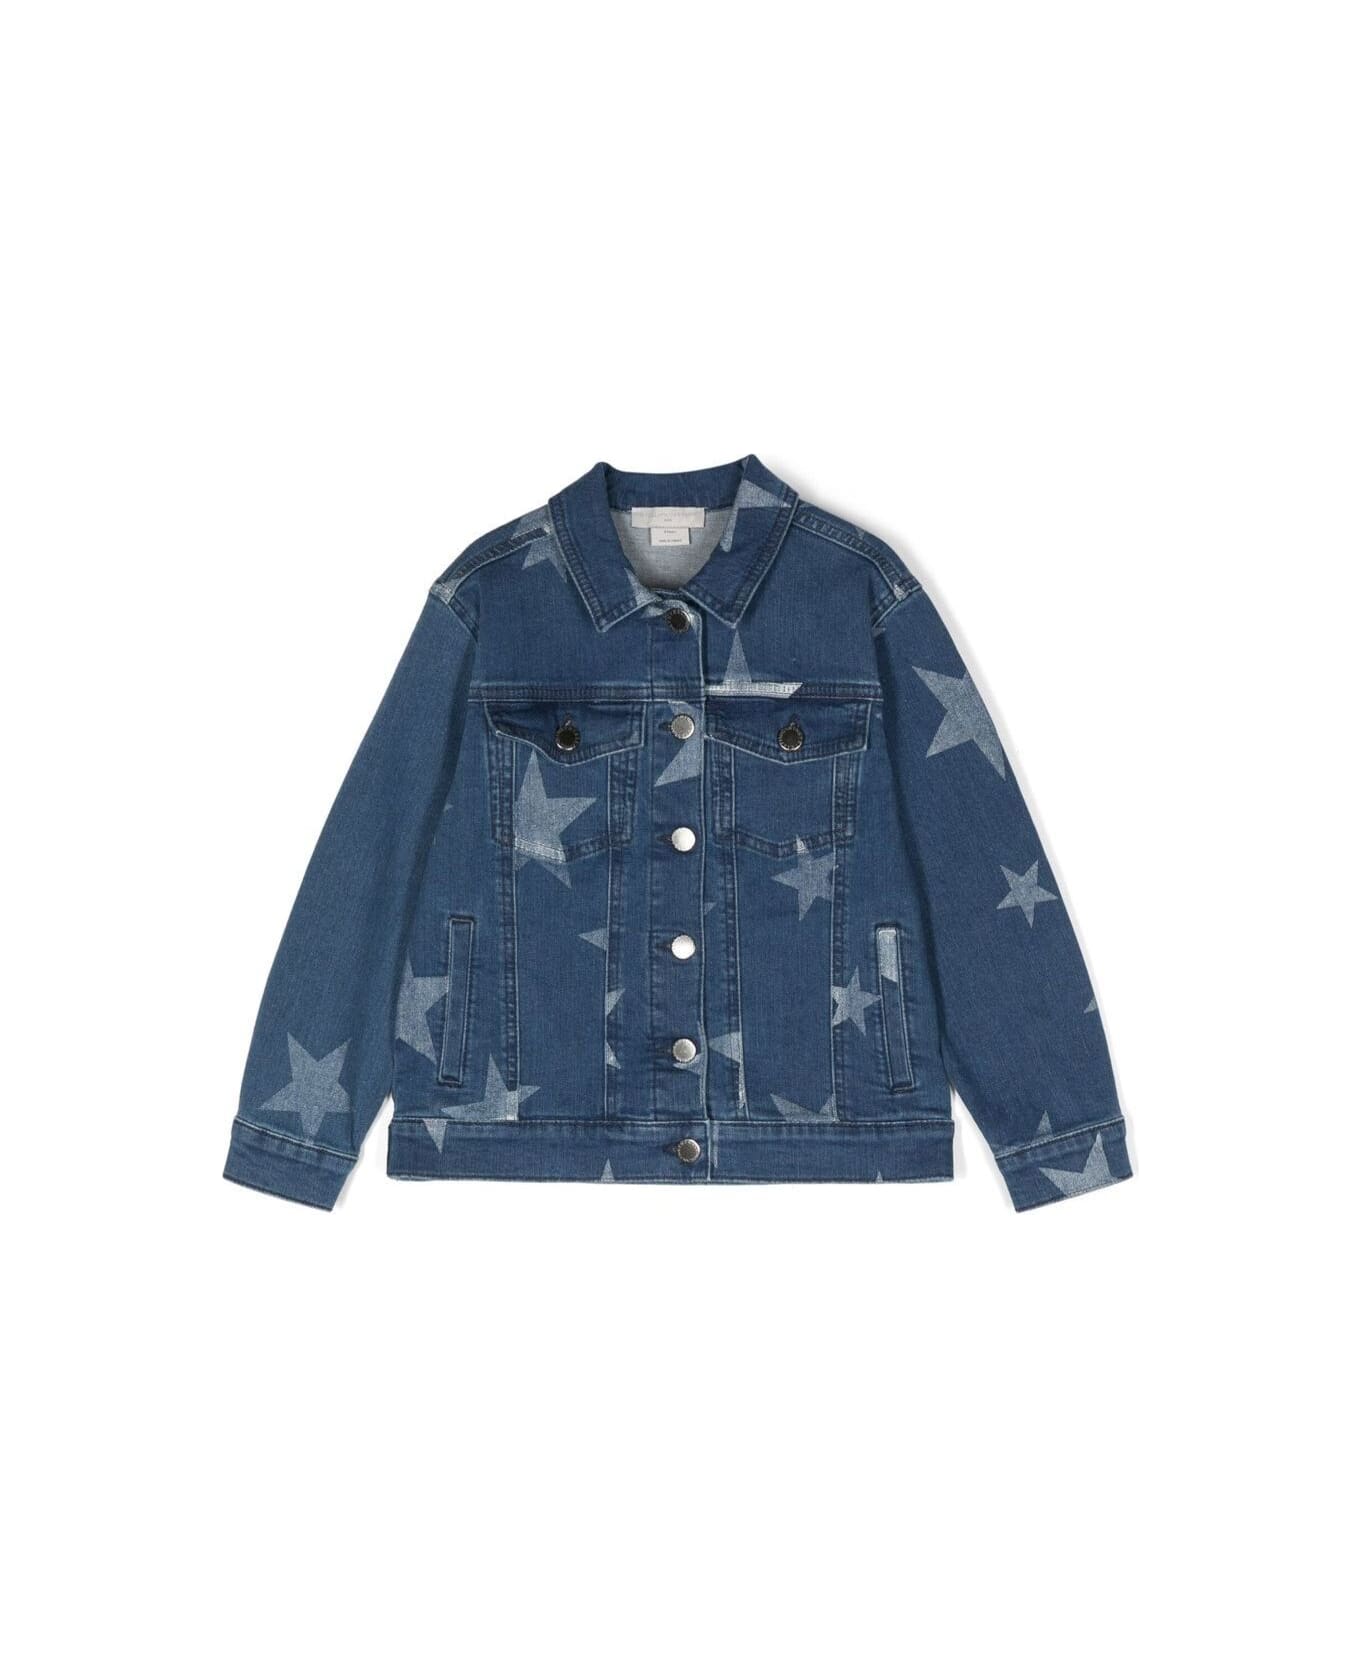 Stella McCartney Kids Jeans Jacket With Star Print In Stretch Cotton Girl - Blue